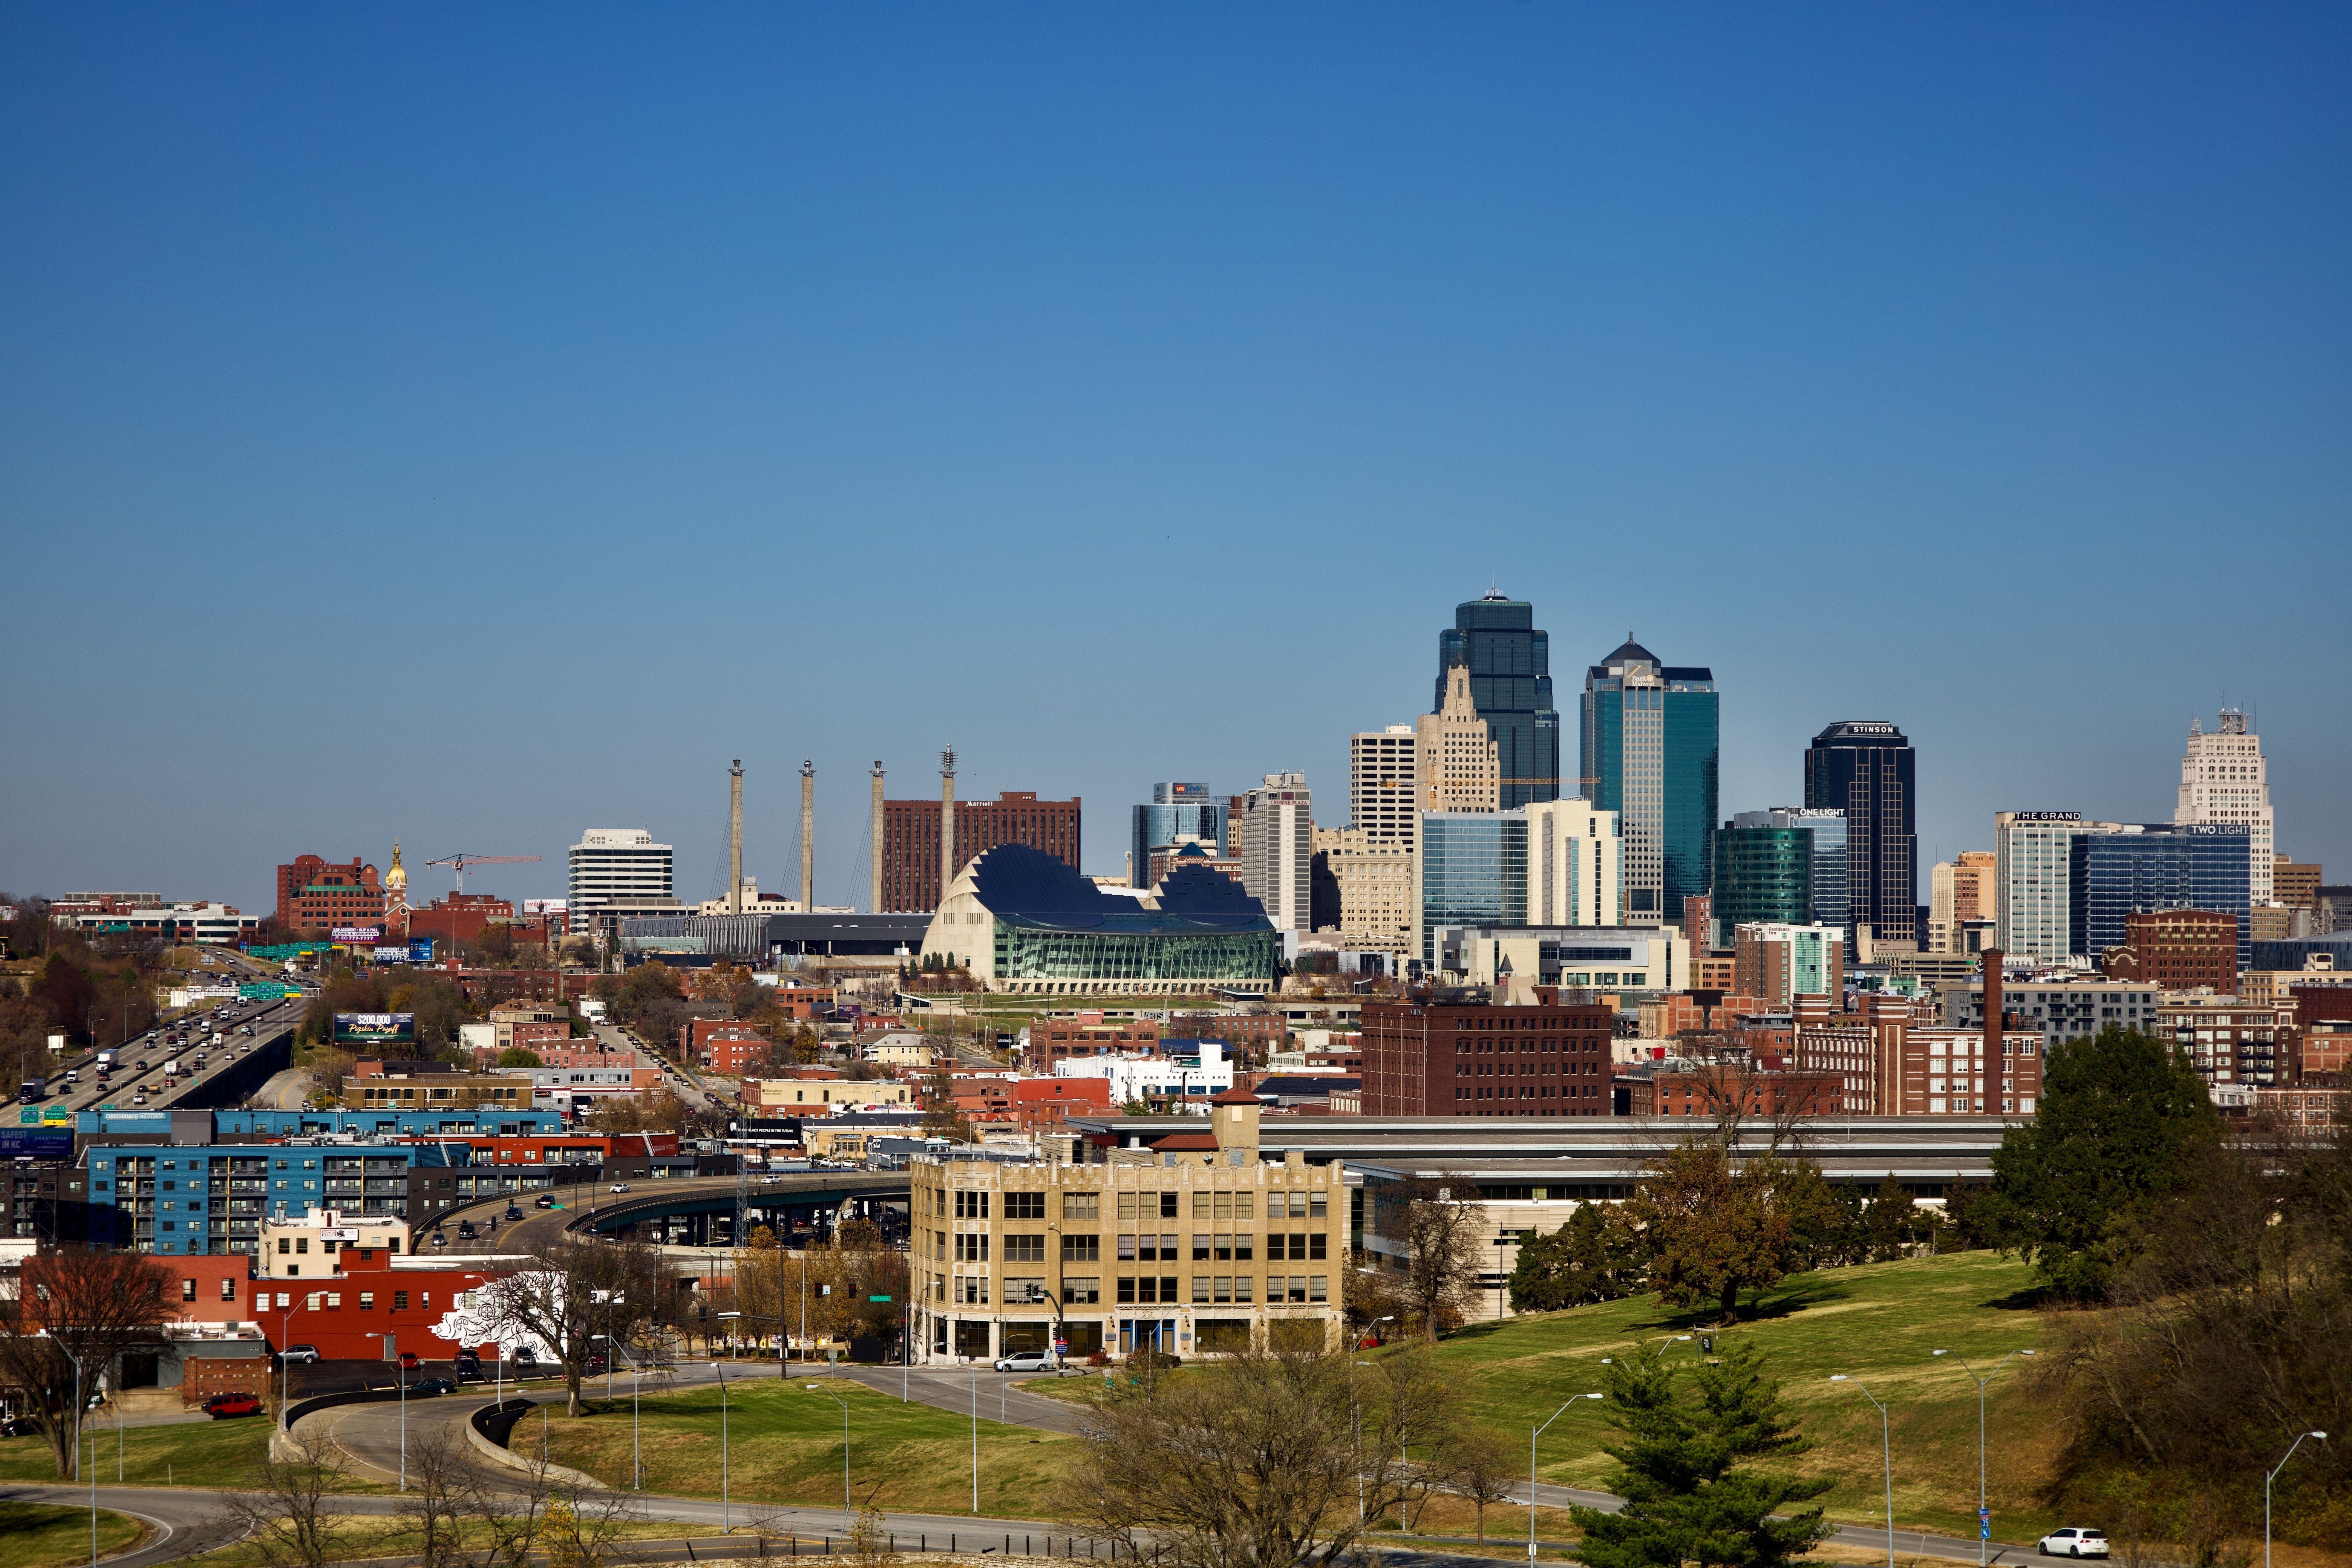 Here's what one architecture firm thinks a downtown Kansas City